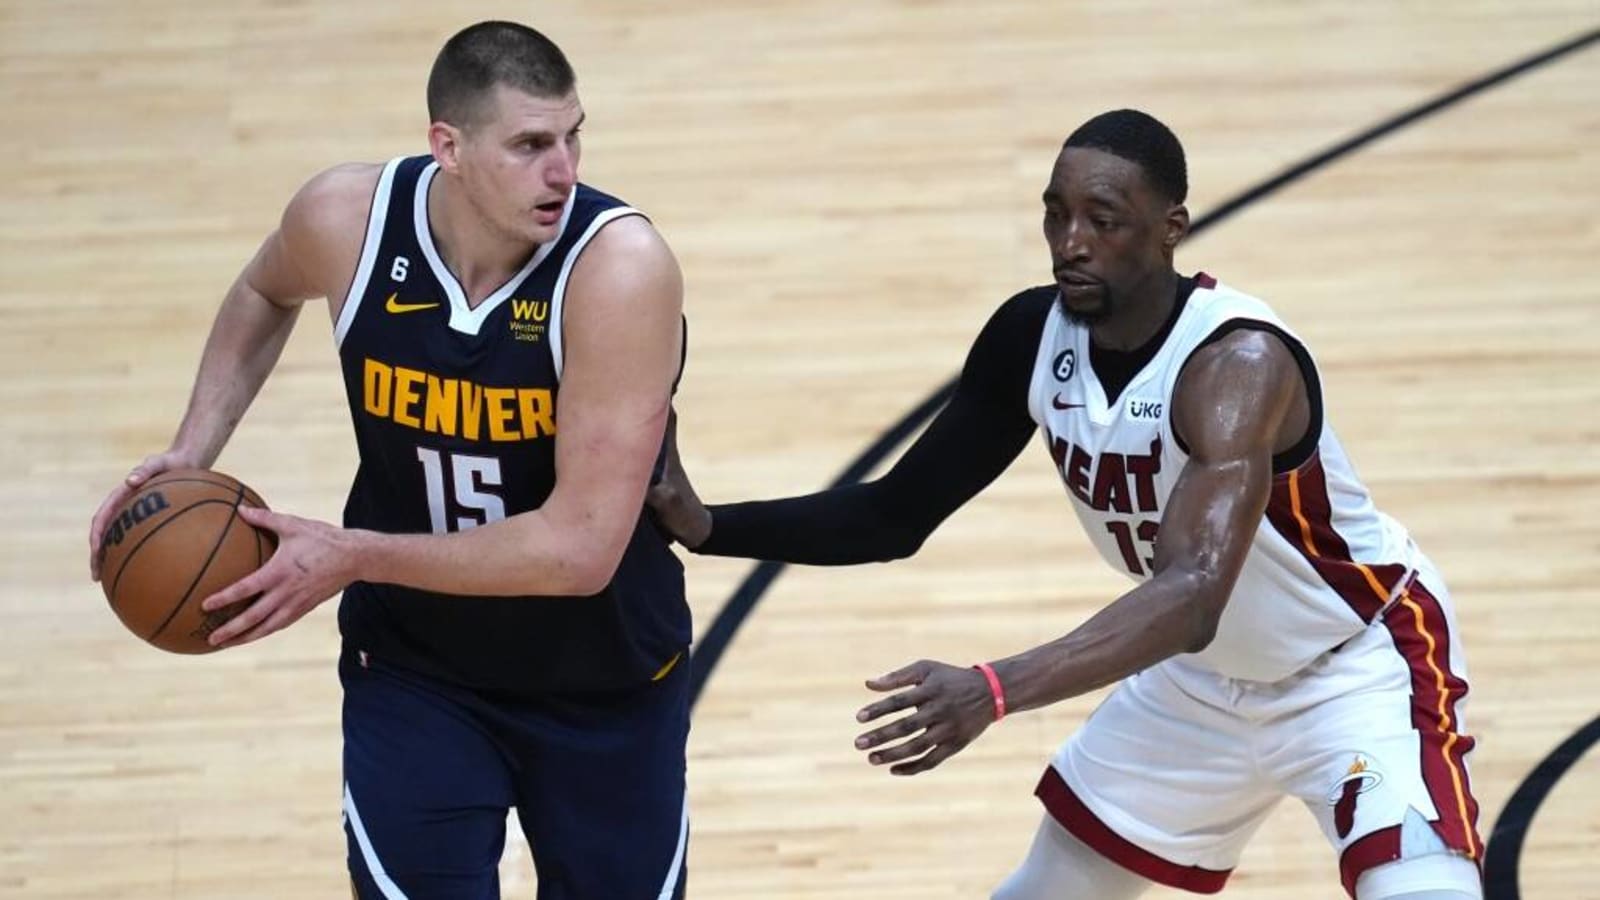 Watch Denver Nuggets vs Miami Heat in Game 5 NBA Finals in free live